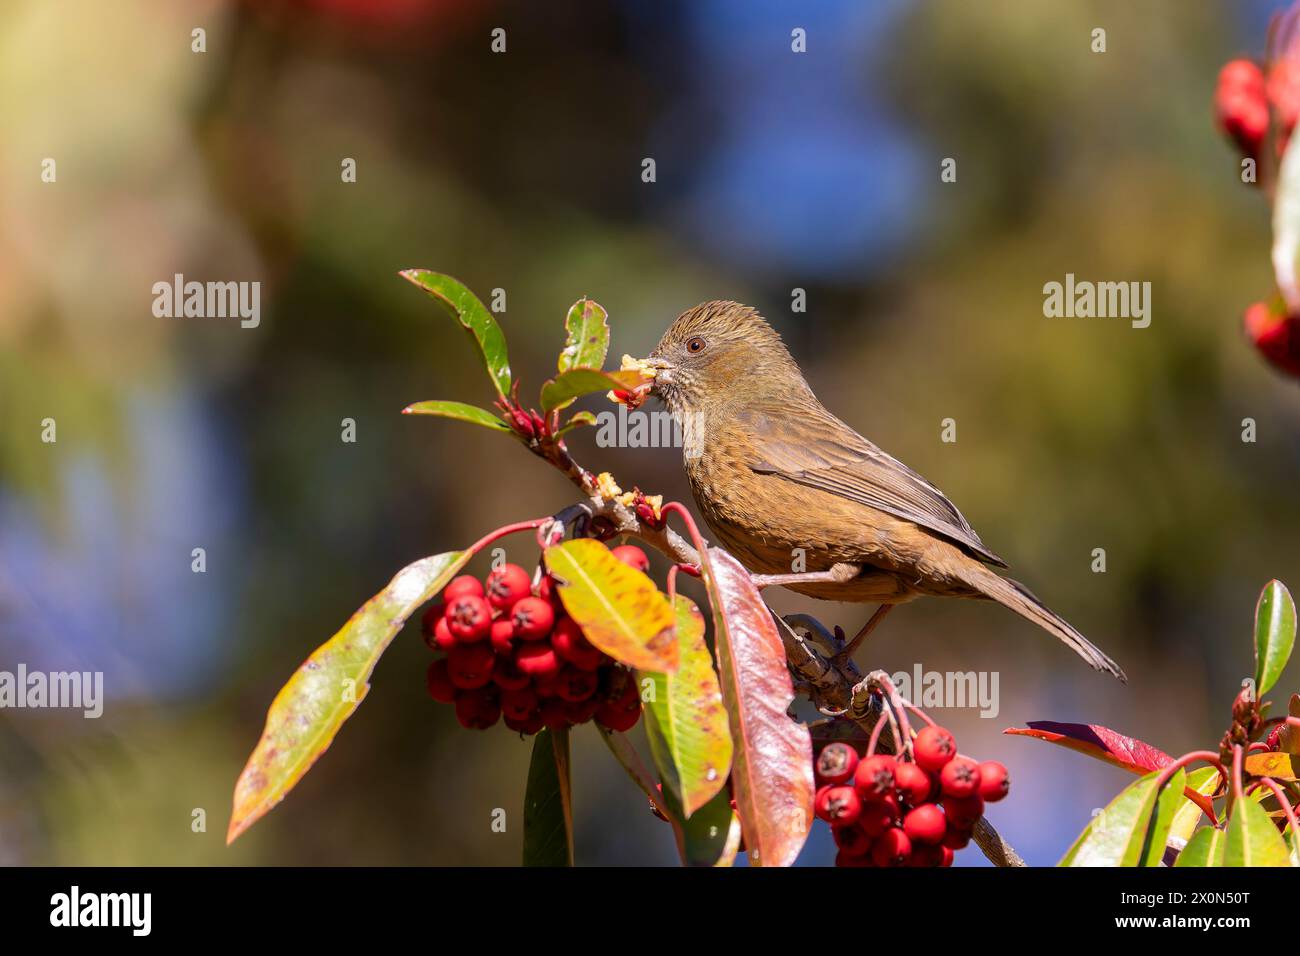 Taiwan rosefinch female, an endemic bird of Taiwan perched on a tree eating red fruits Stock Photo